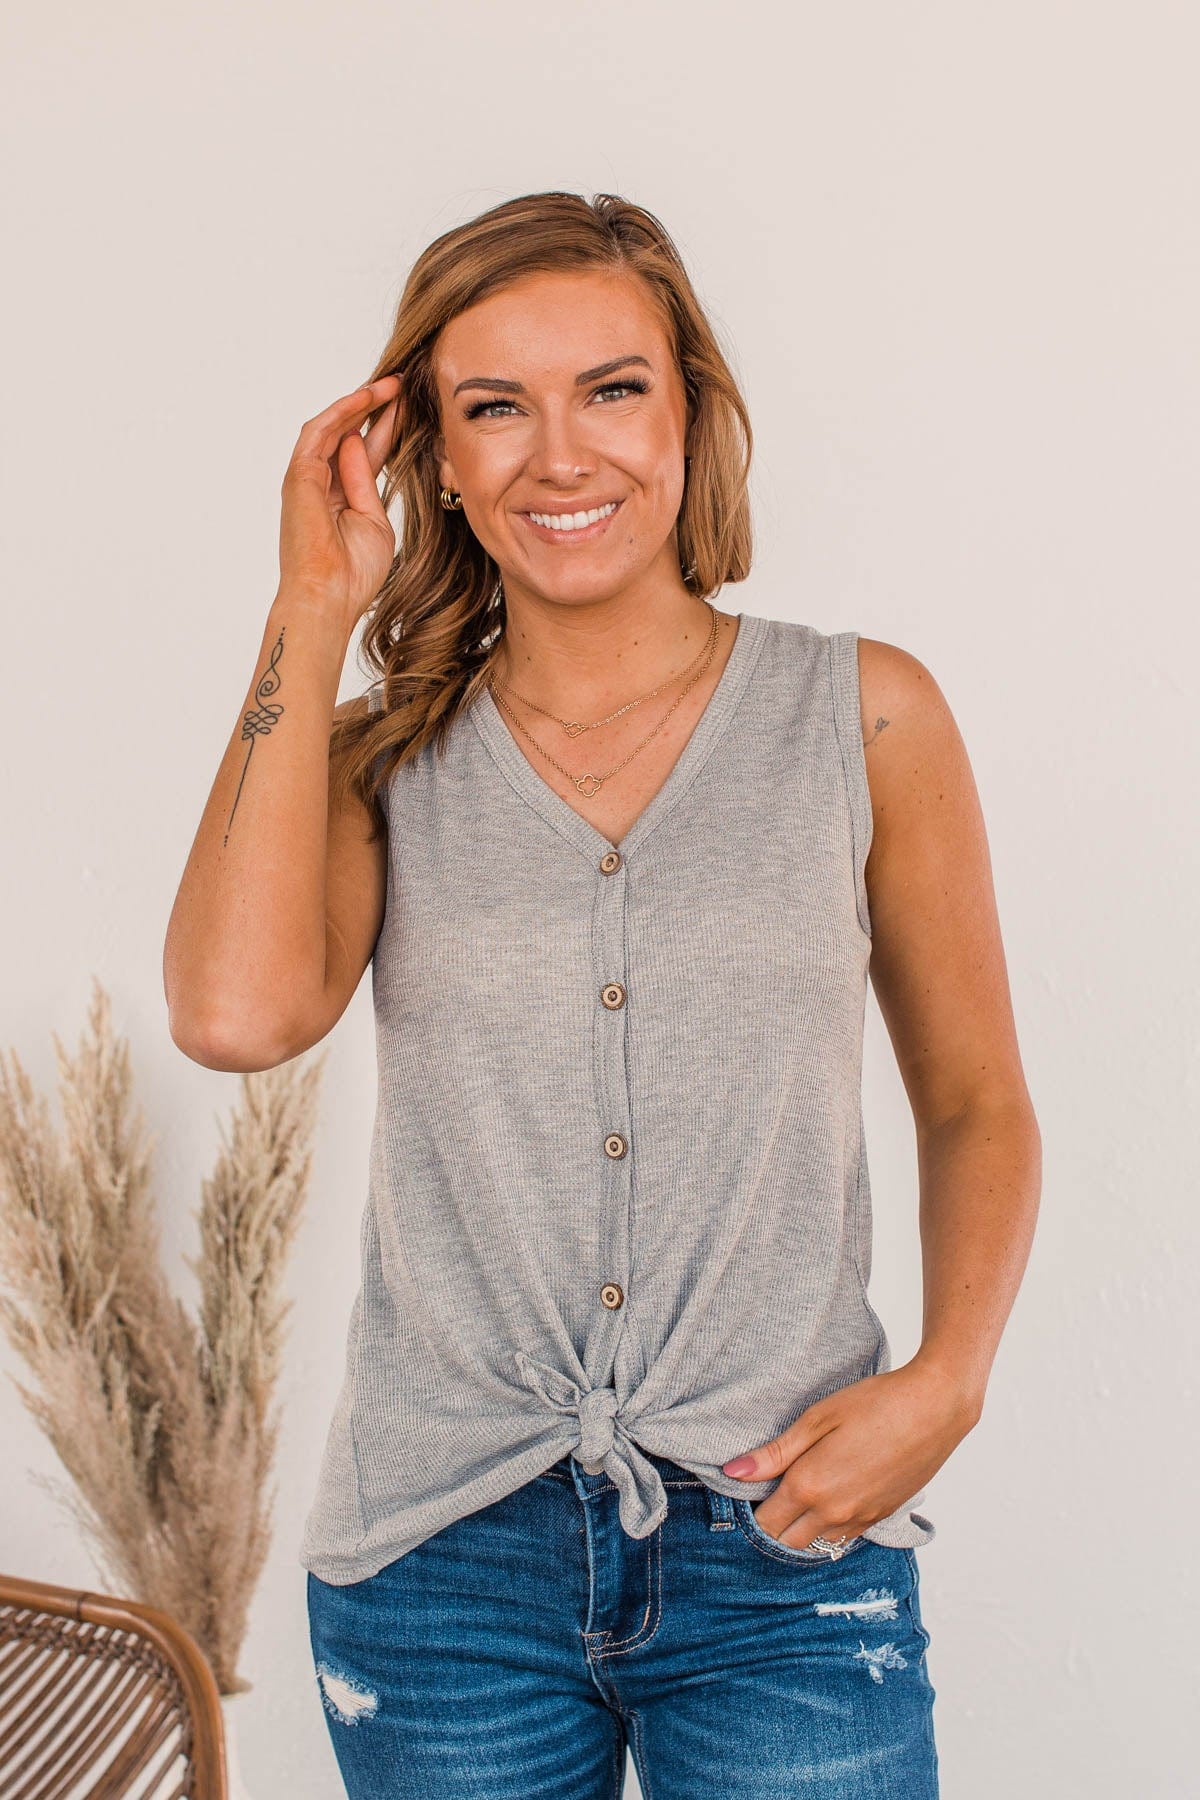 See How I Arrive Button Tank- Gray